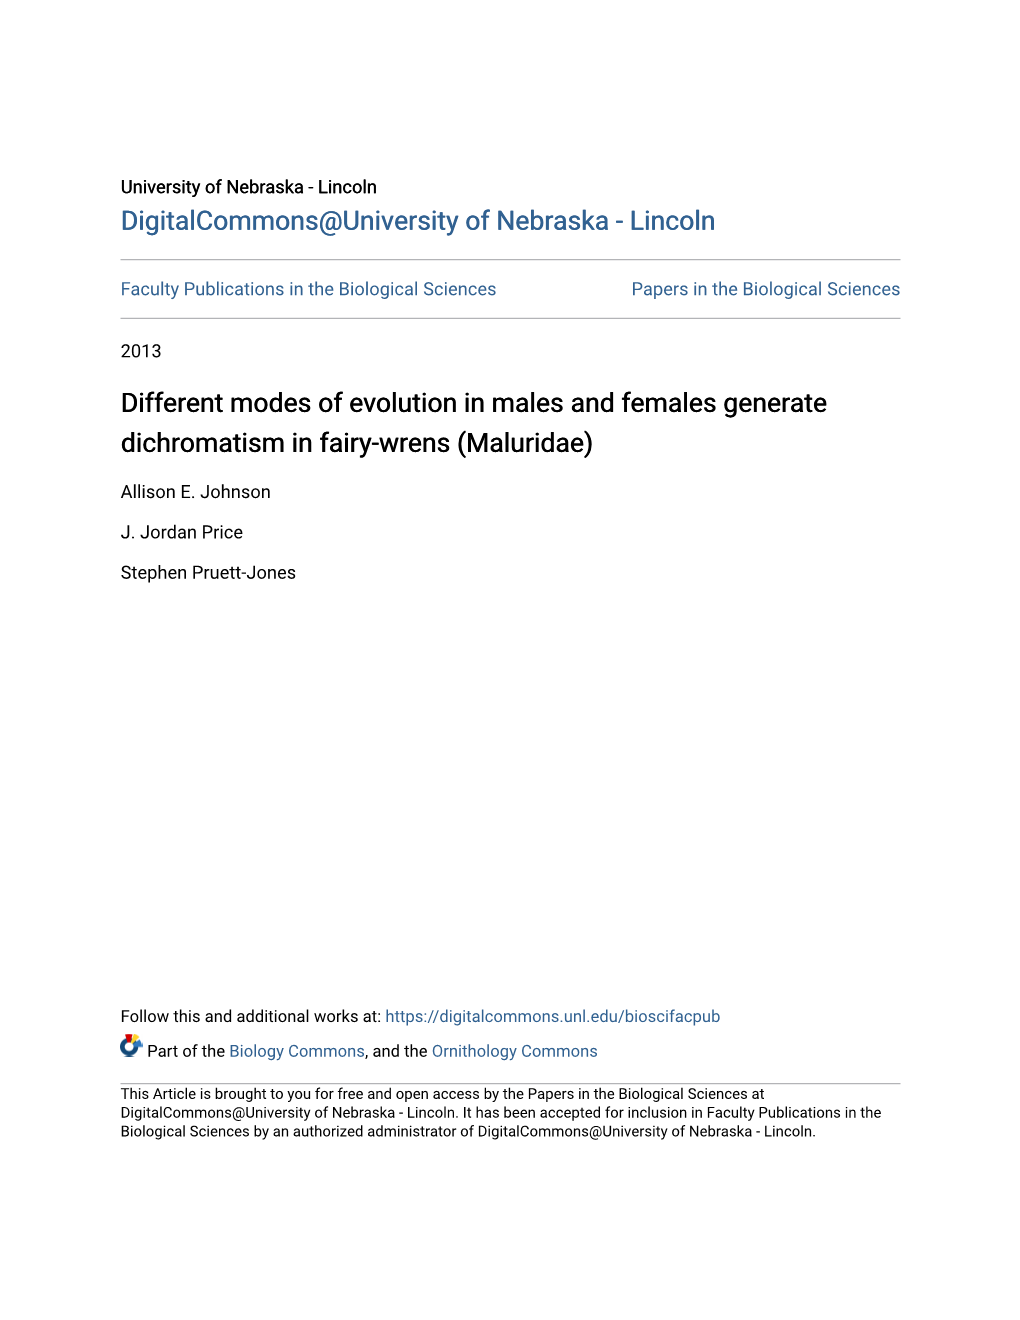 Different Modes of Evolution in Males and Females Generate Dichromatism in Fairy-Wrens (Maluridae)